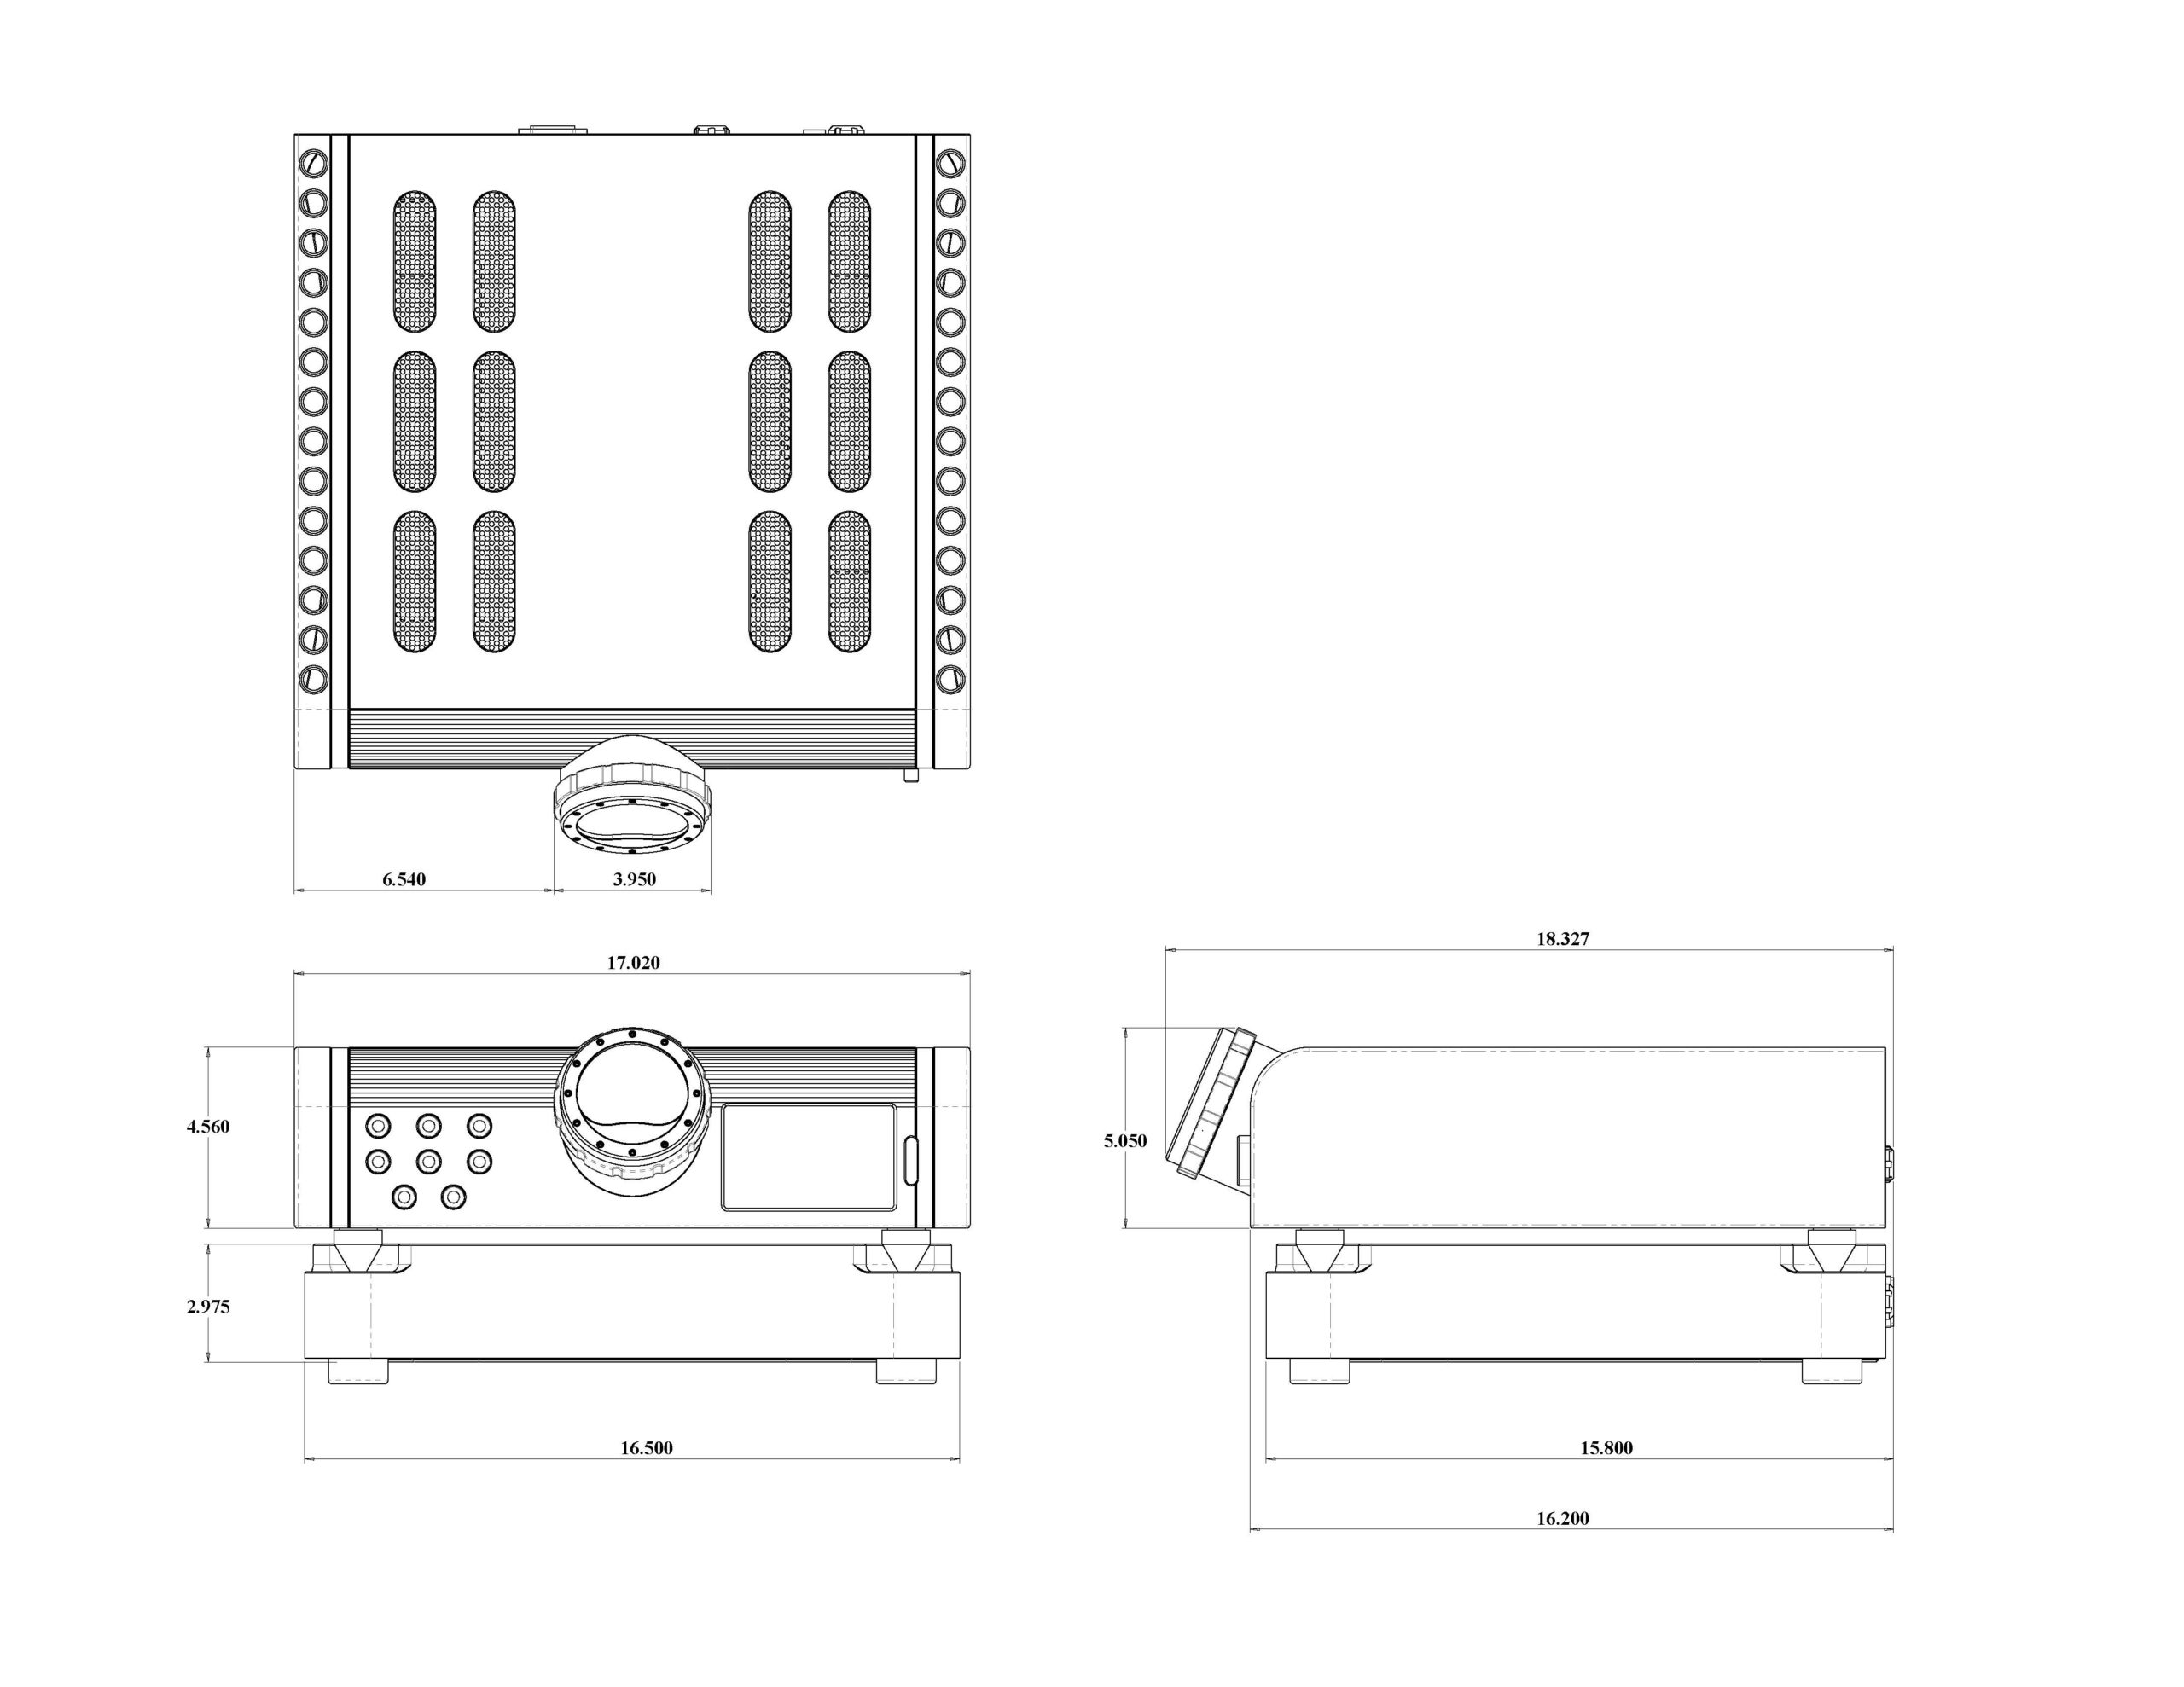 Dan D'Agostino Momentum Lifestyle Integrated Amplifier Drawings - Norman Audio